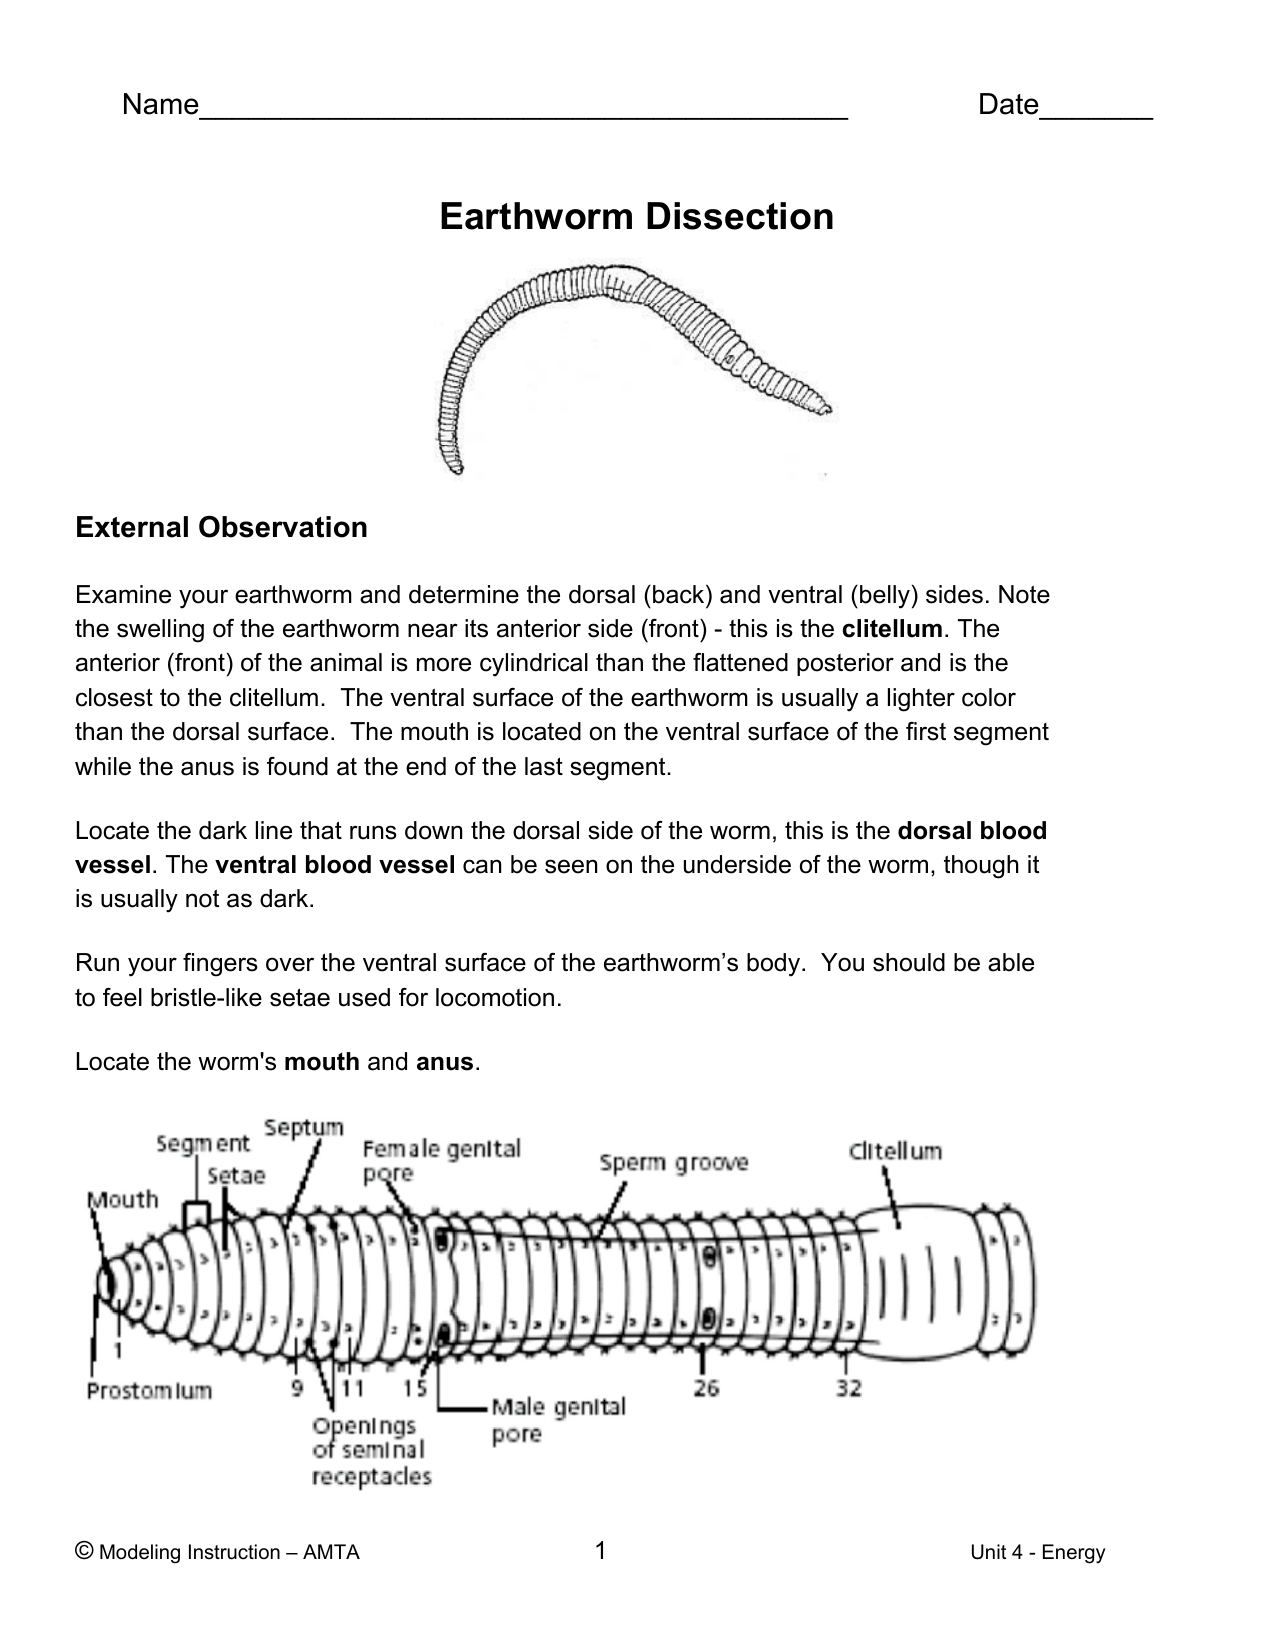 Virtual Earthworm Dissection Worksheet The Earth Images Revimage Org